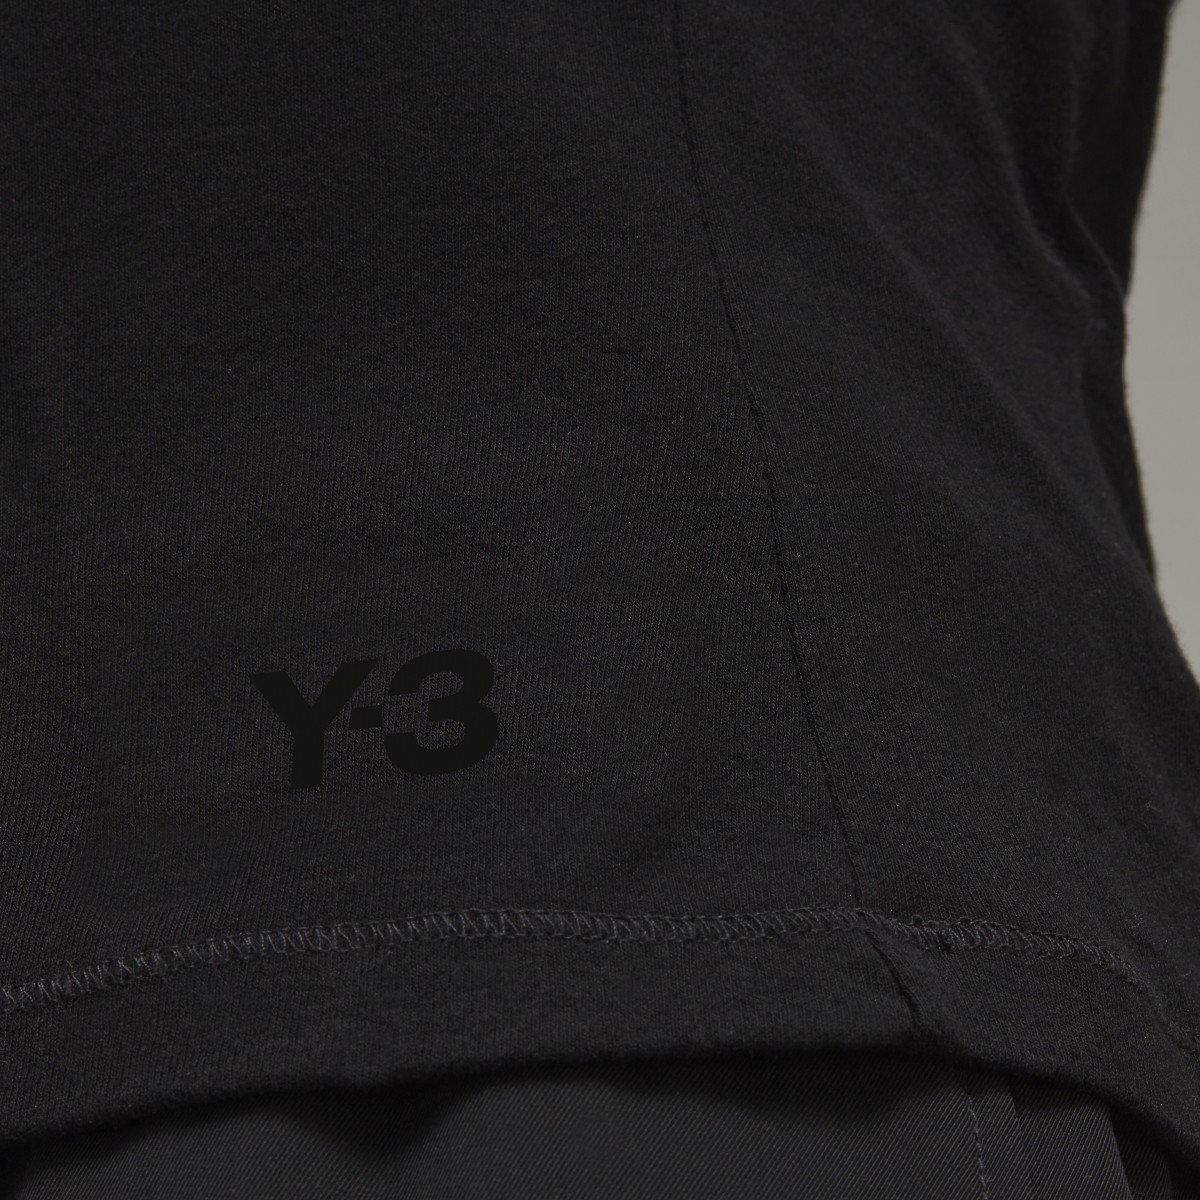 Adidas Y-3 Fitted Short Sleeve T-Shirt. 6